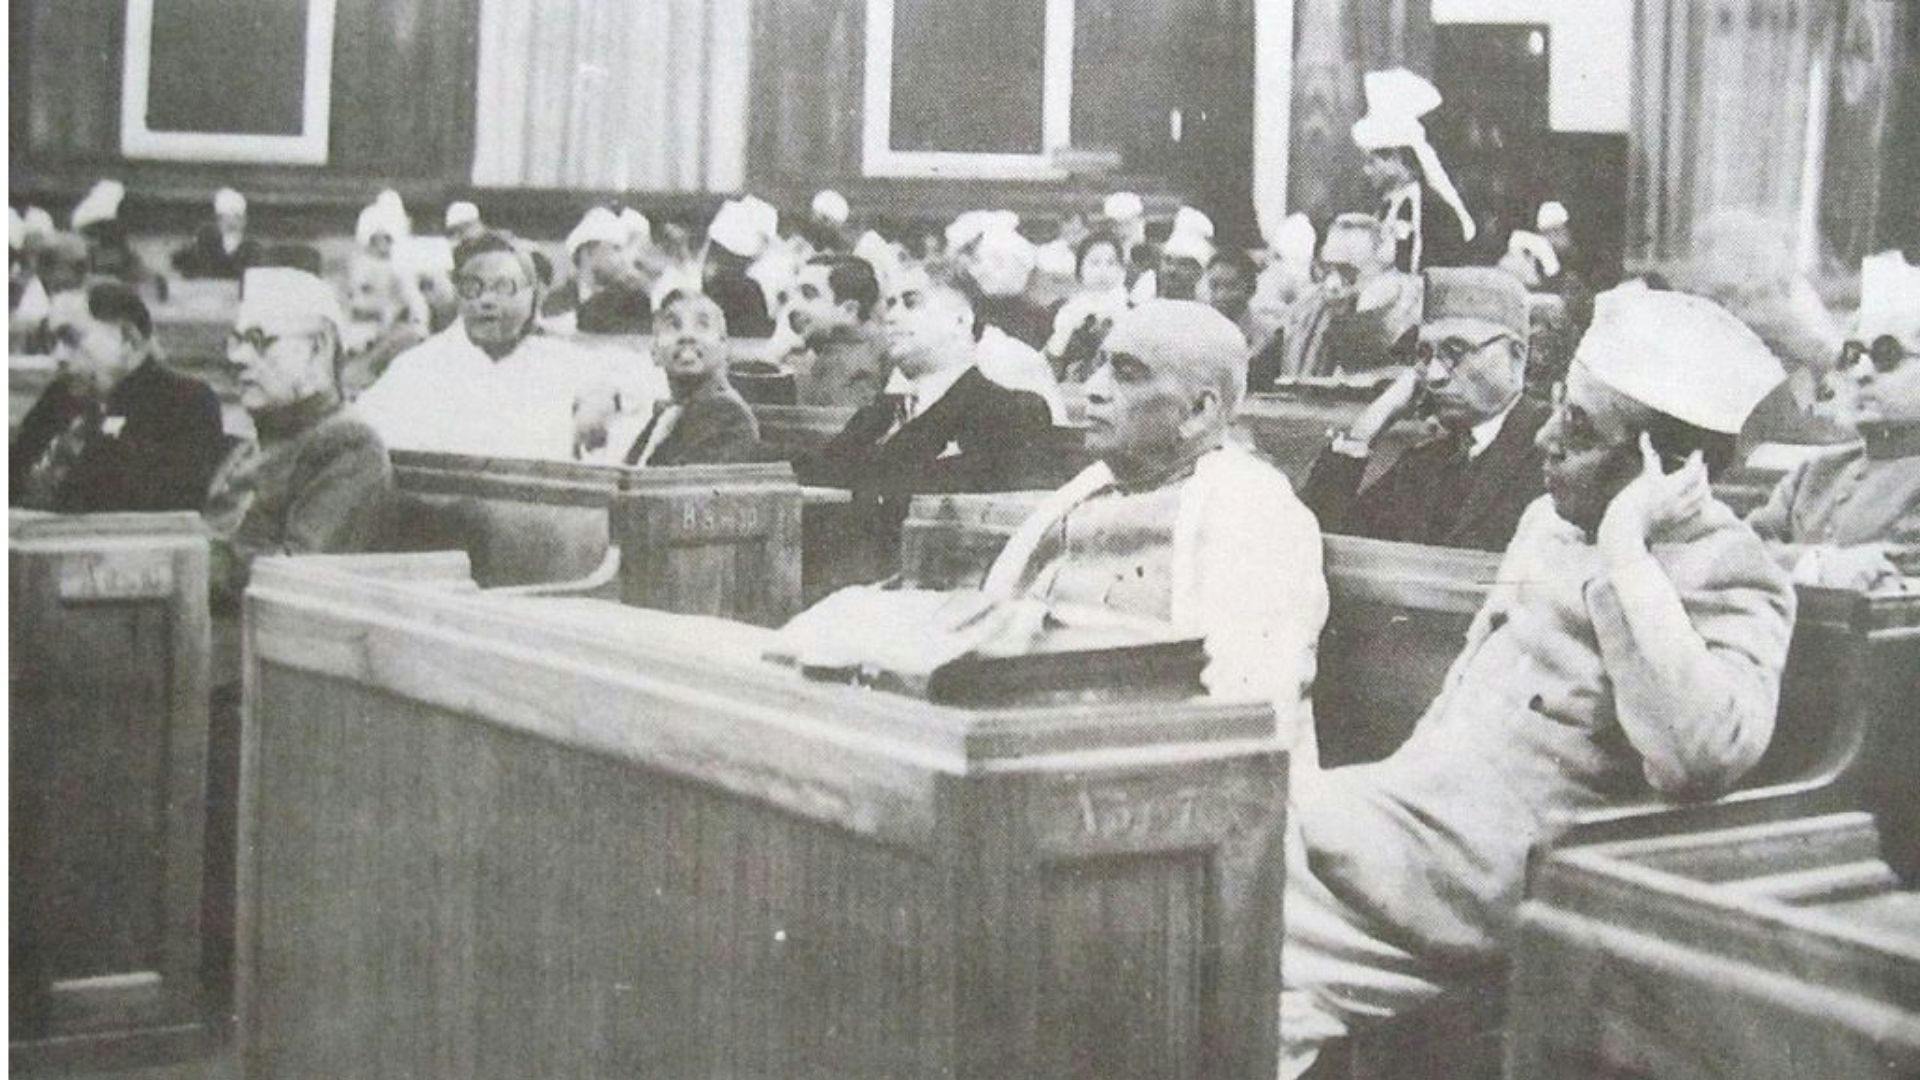 First day of Constituent Assembly of India